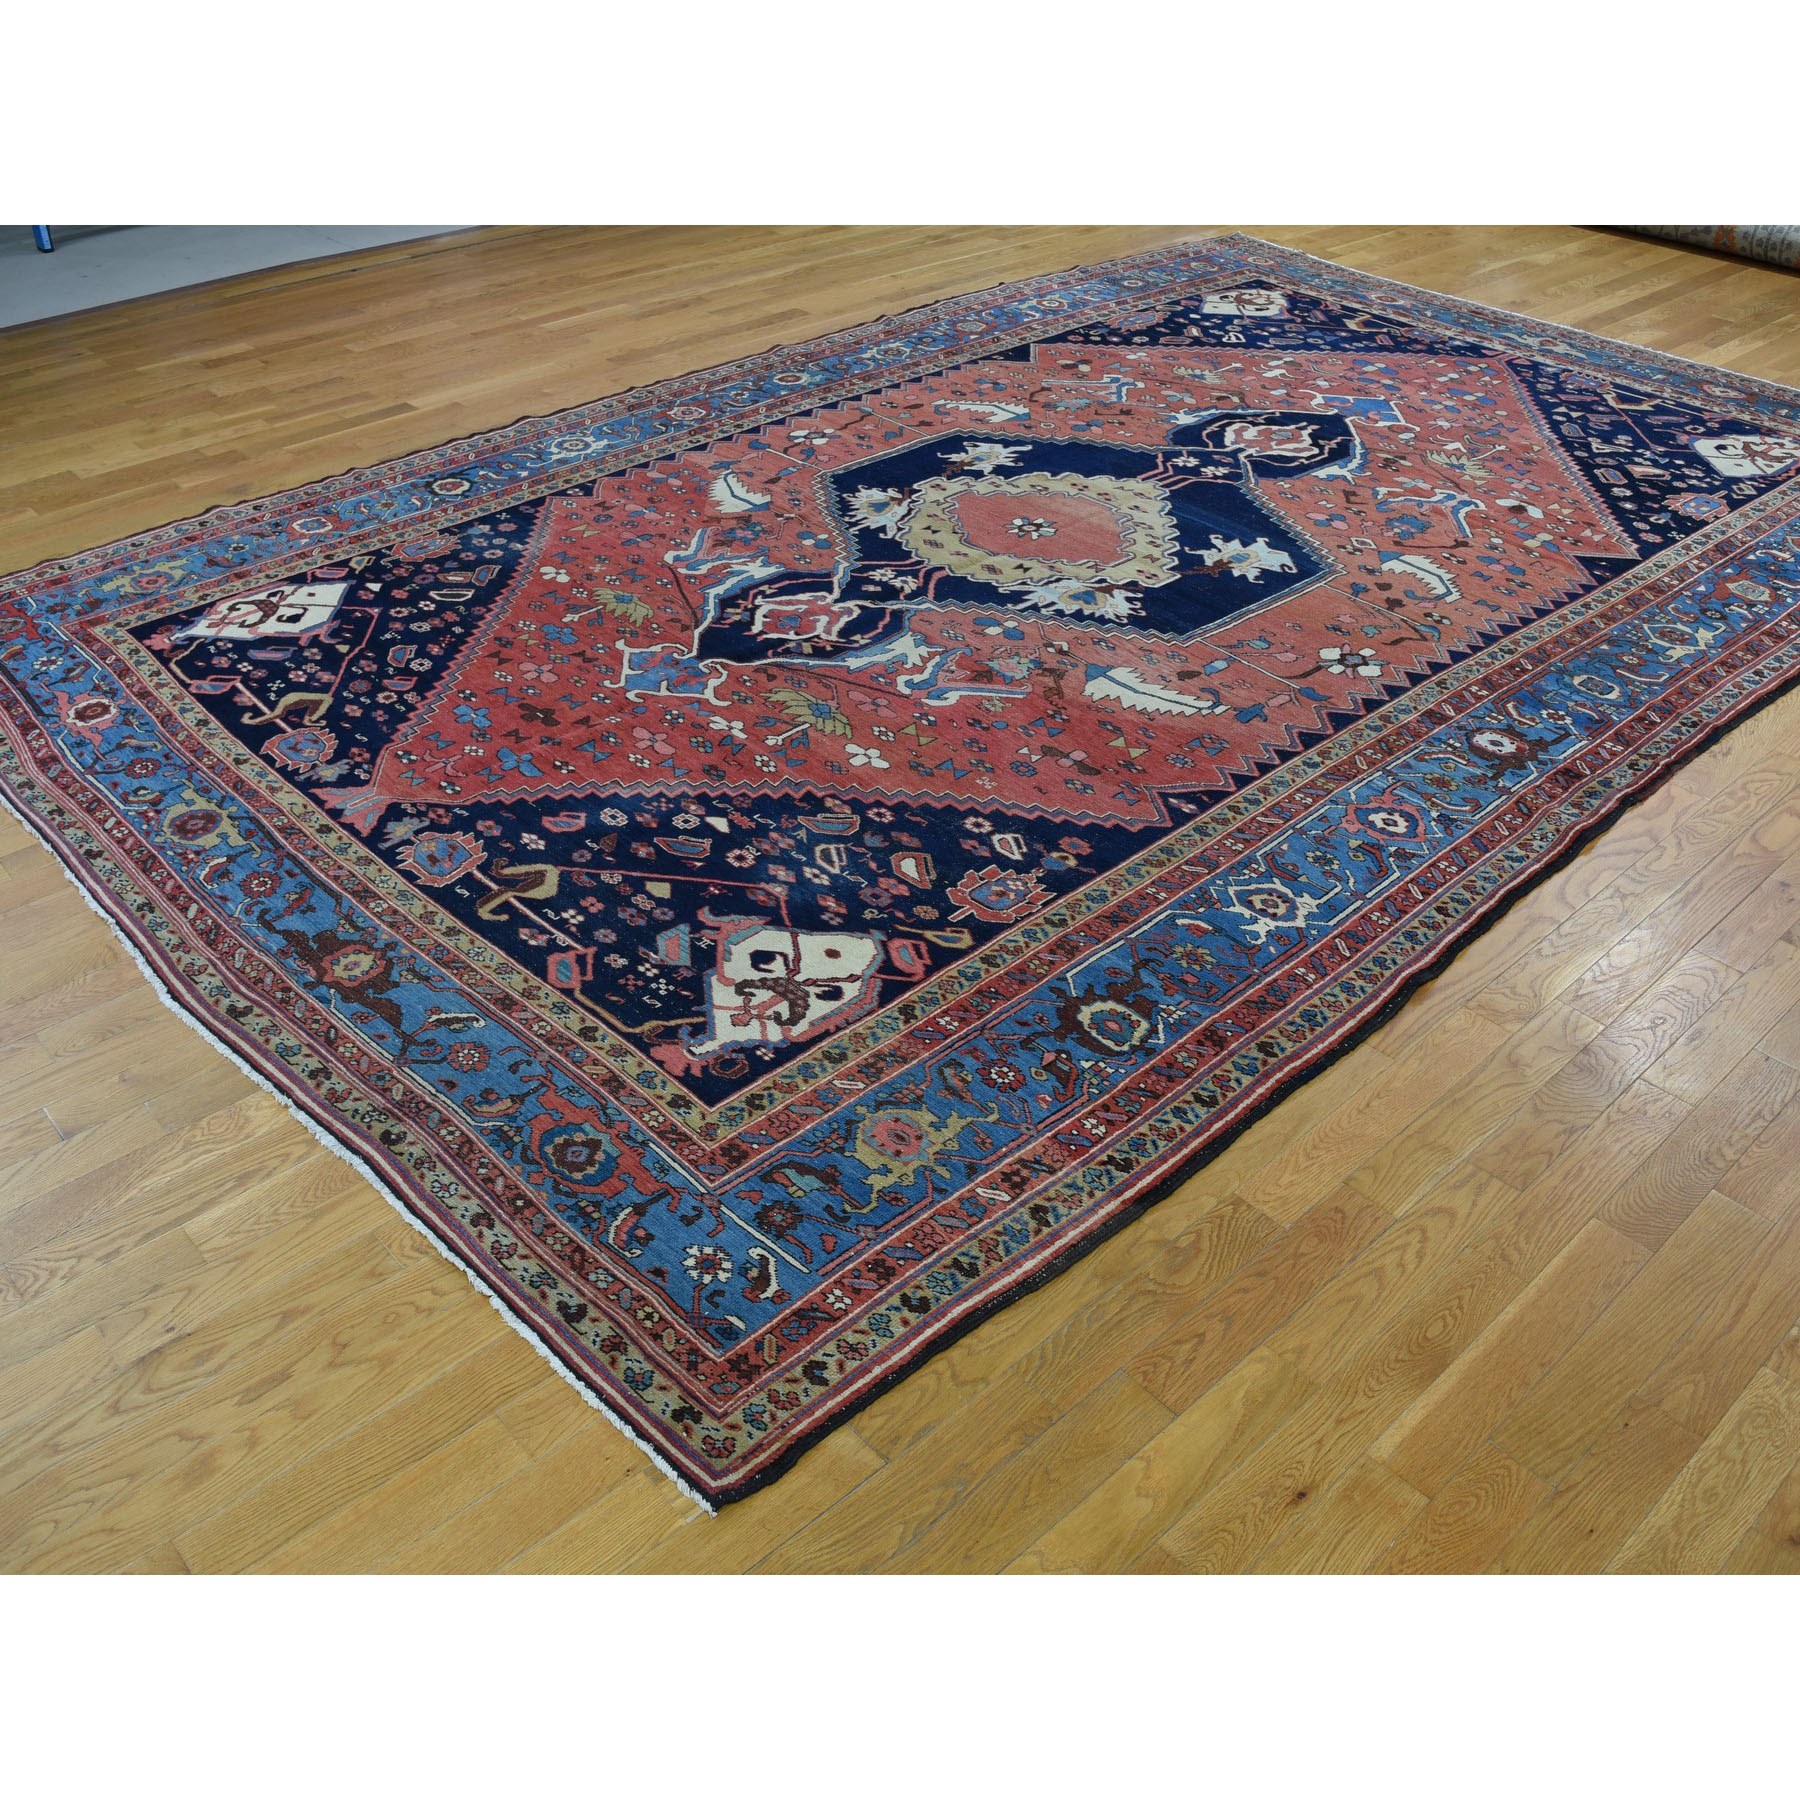 9'5"x14'10" Terracotta Red Antique Persian Bakshaish Good Condition Clean Pure Wool Hand Woven Rug 